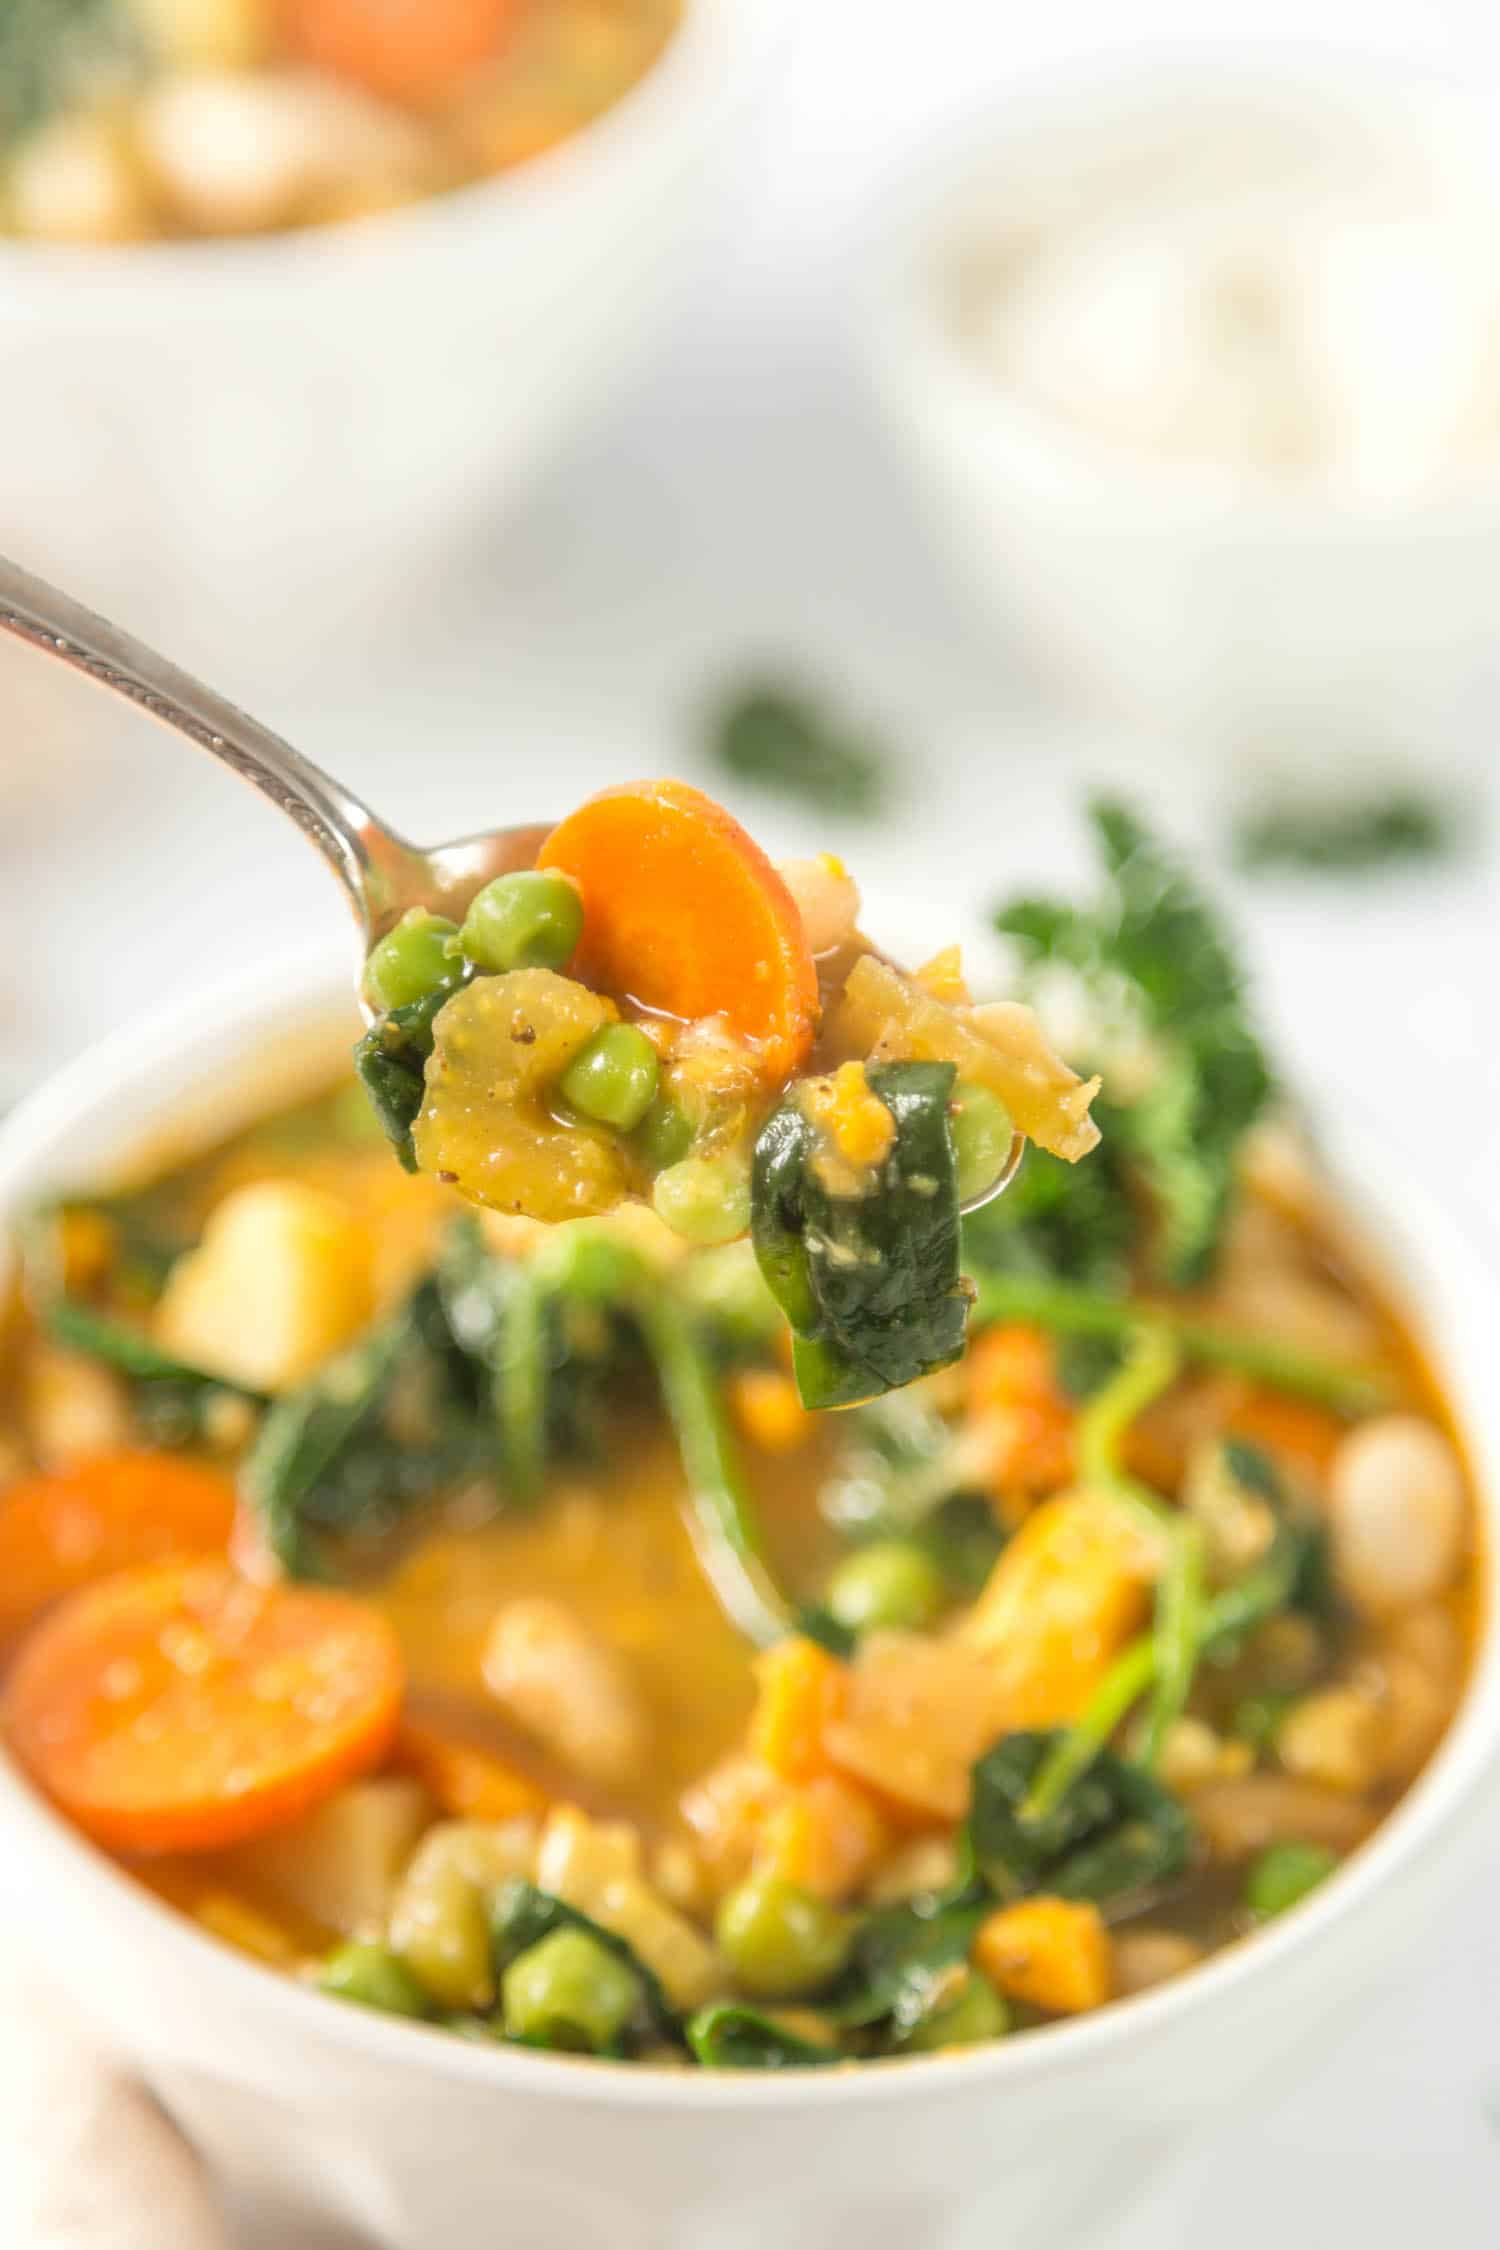 spoonful of vegan stew with veggies and beans